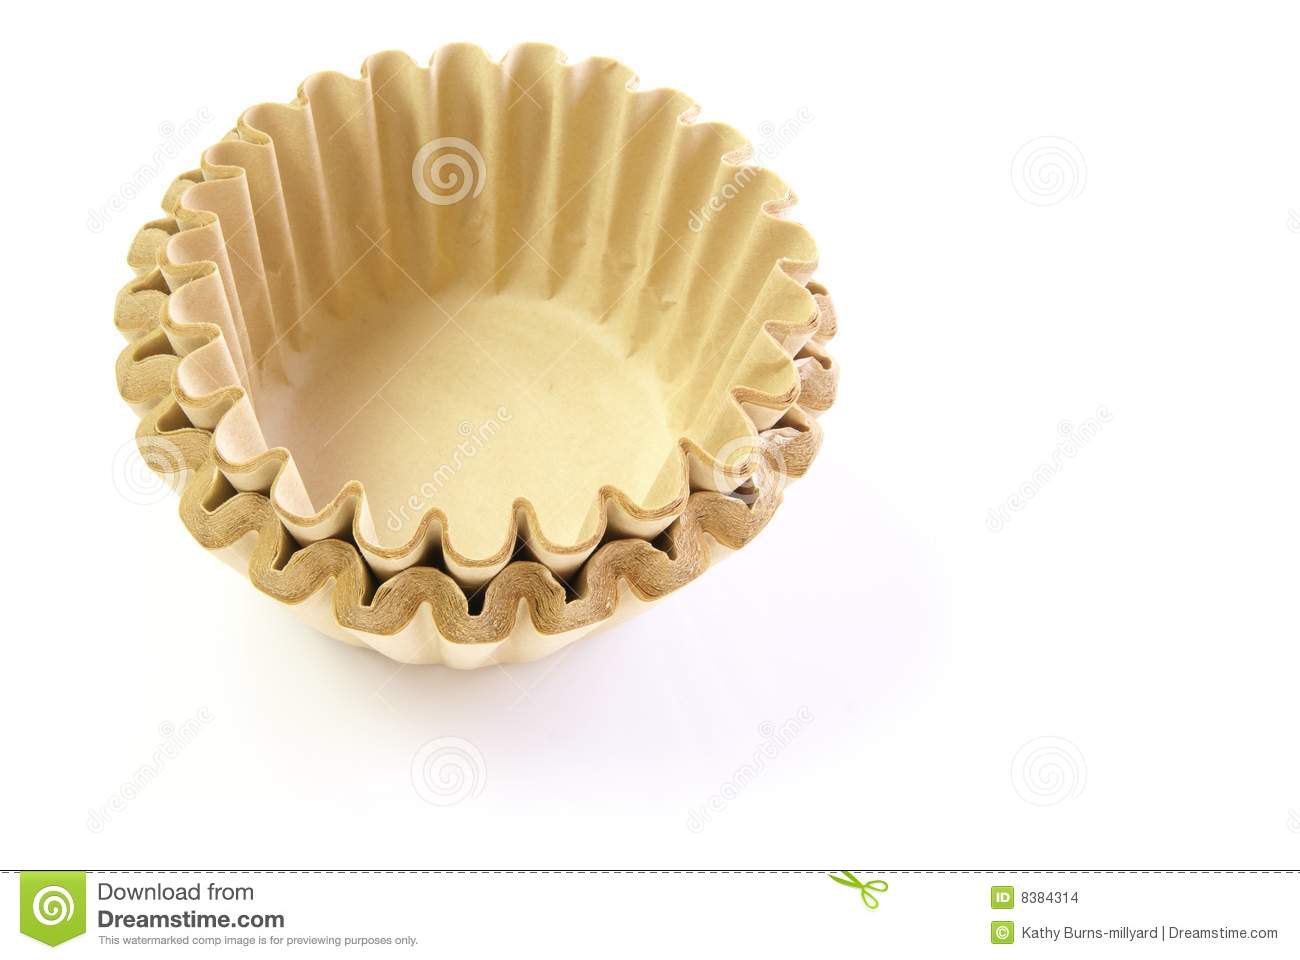 Coffee Filters Stock Images   Image  8384314